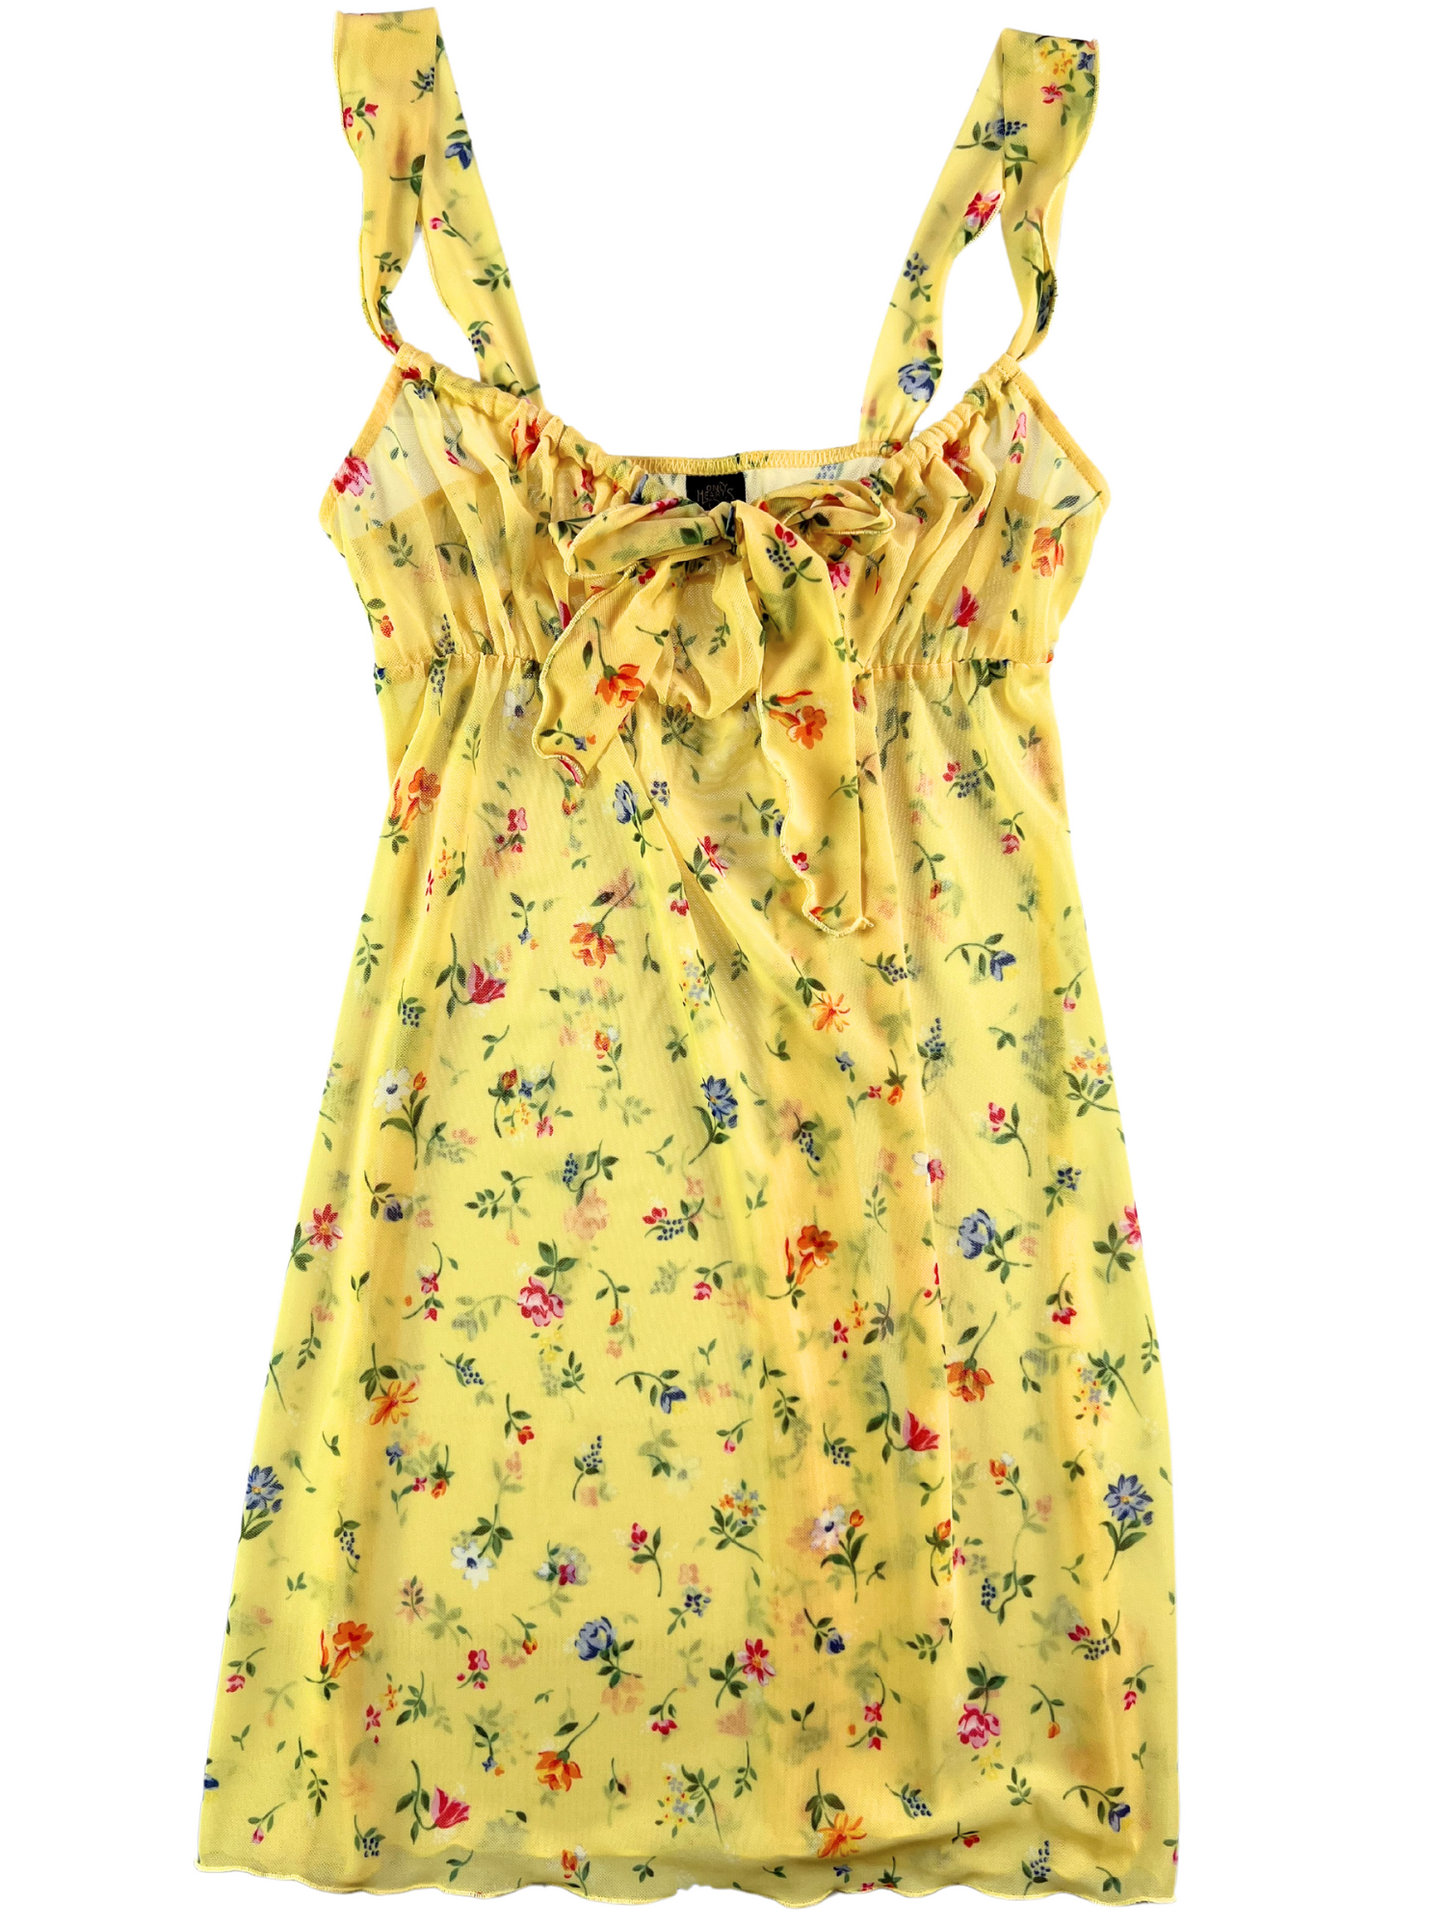 Only Hearts Meadow Sweet Sofia Chemise - Yellow Floral